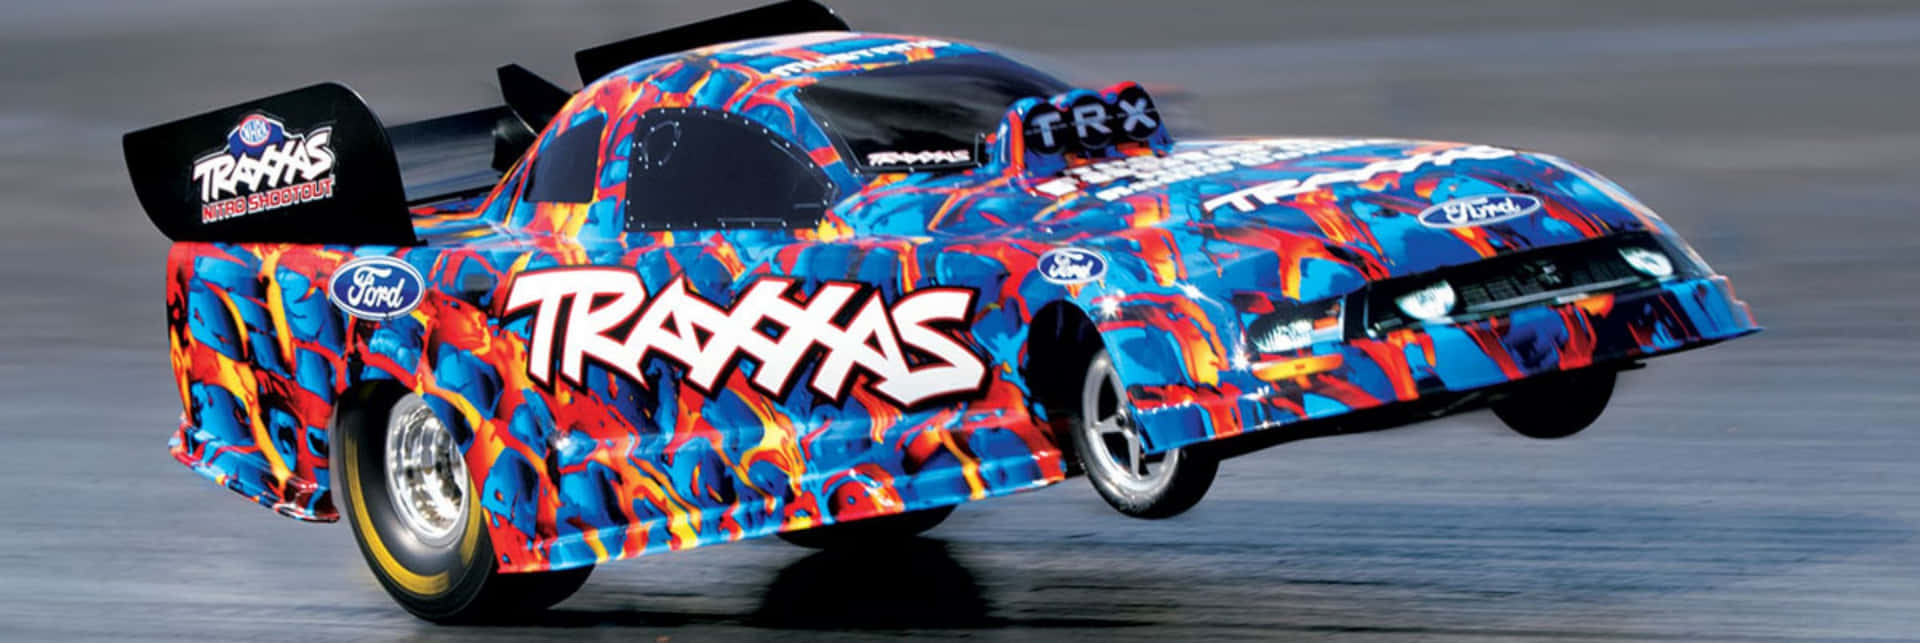 Monster Power Comes to Life in this Big Funny Car